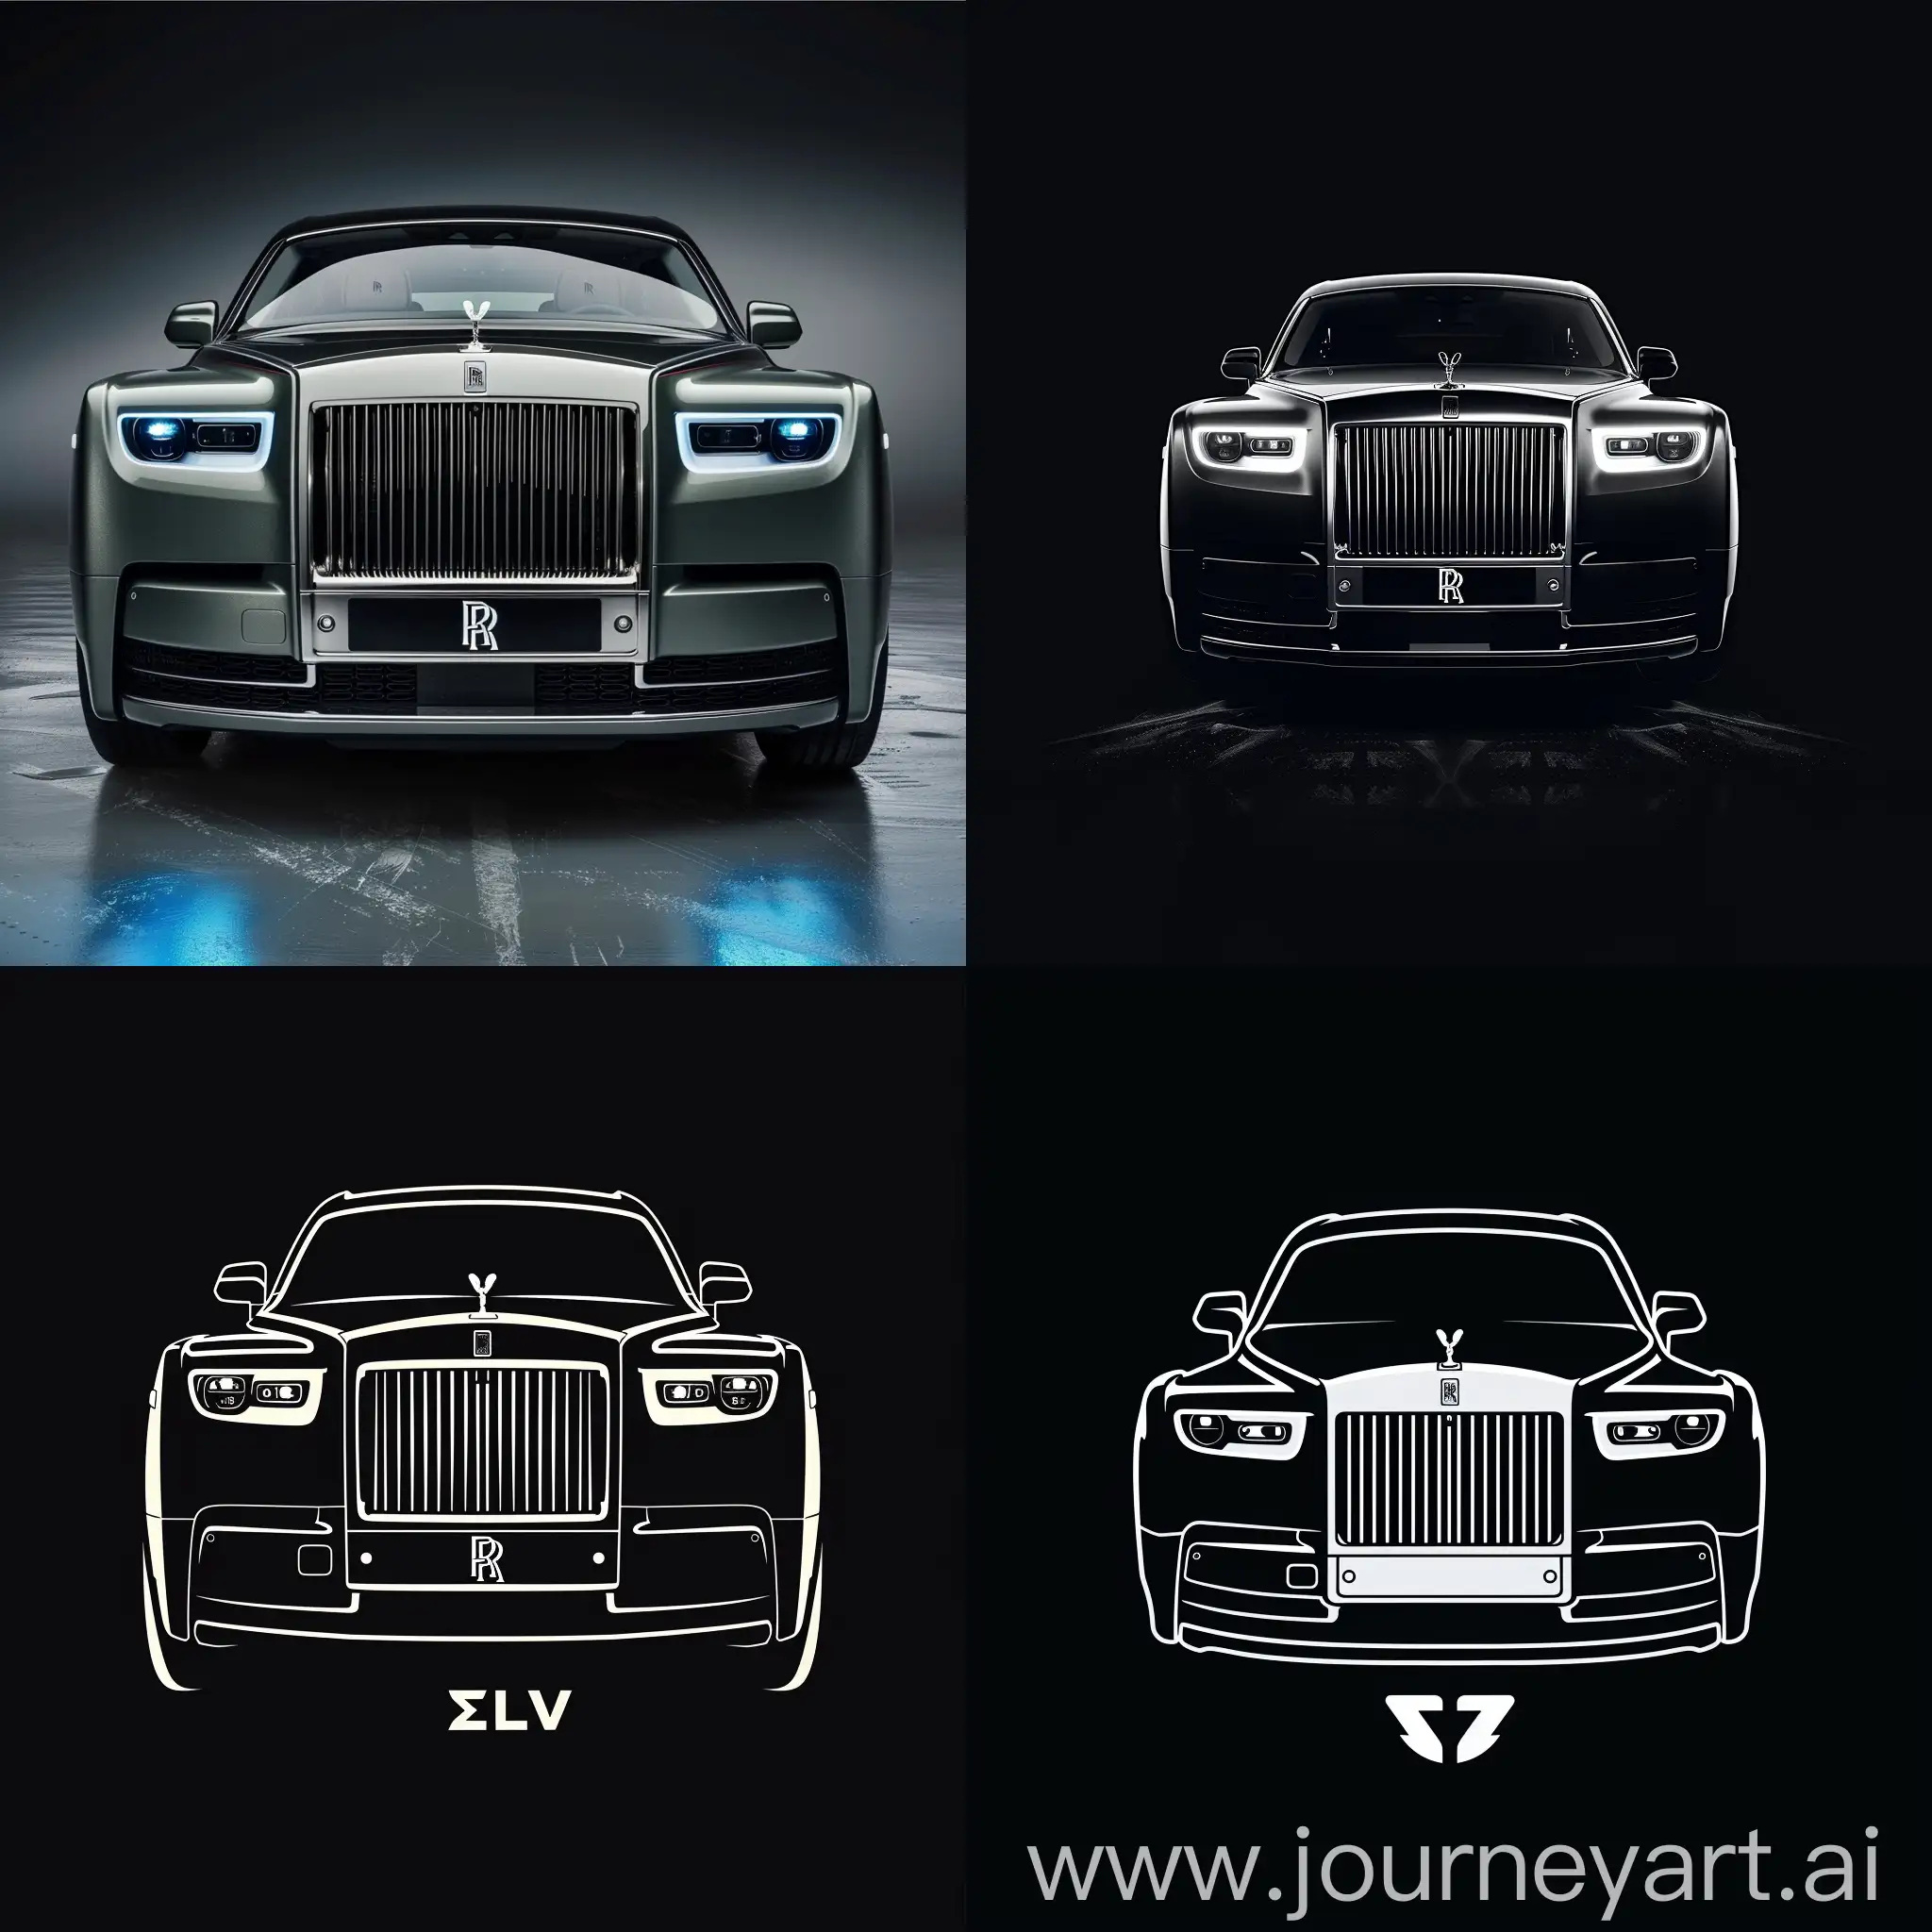 logo like Rolls-royce but with text EV